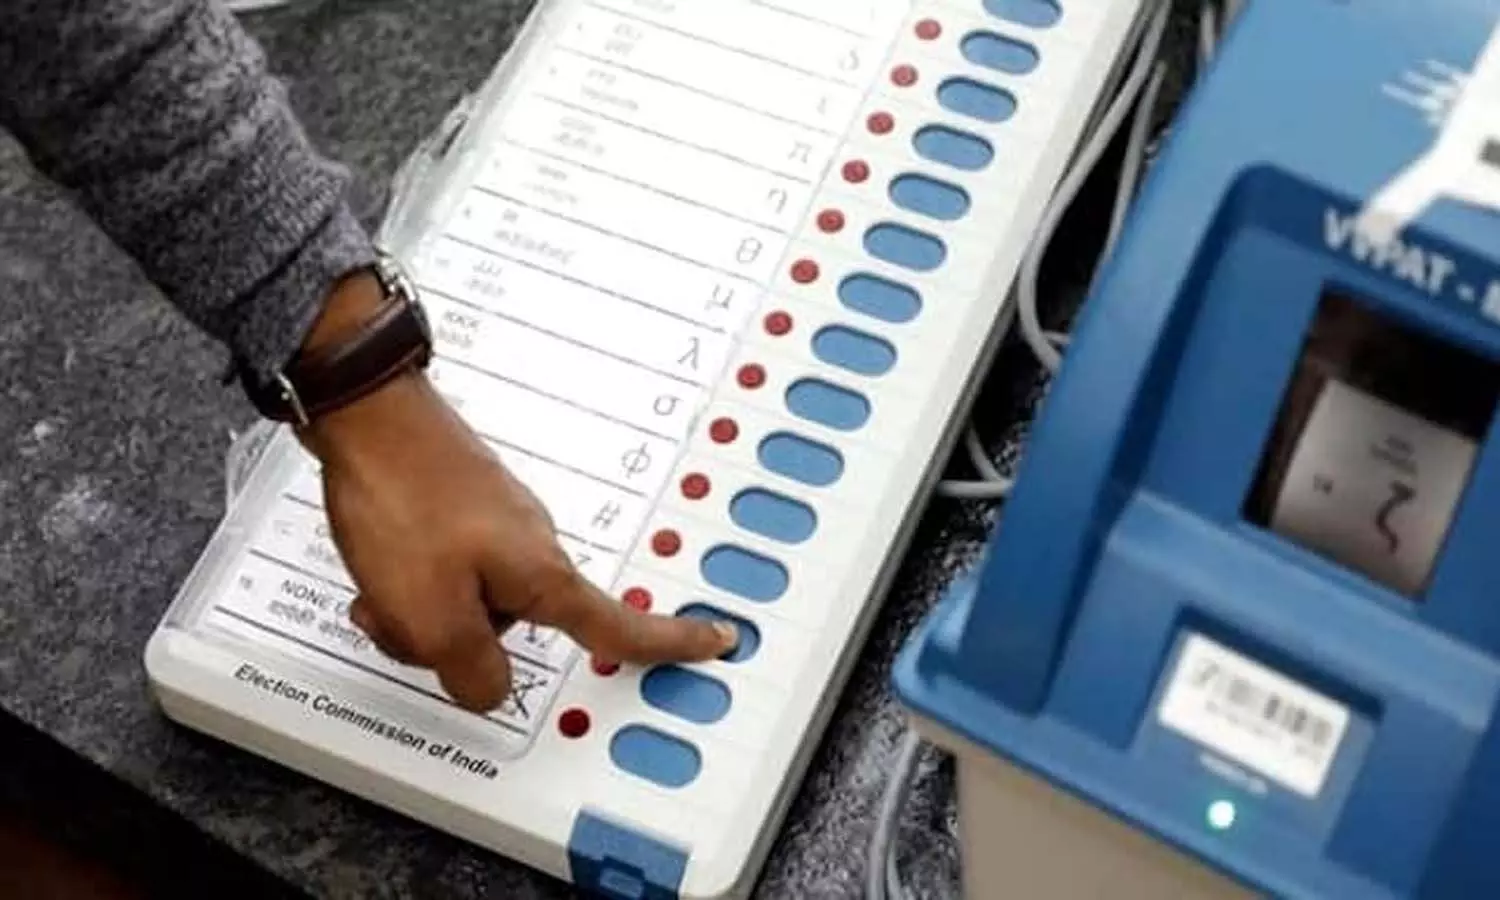 UP Election 2022: In Lakhimpur, mischievous elements put faviquick on EVM, SP candidate said, pasted SPs button